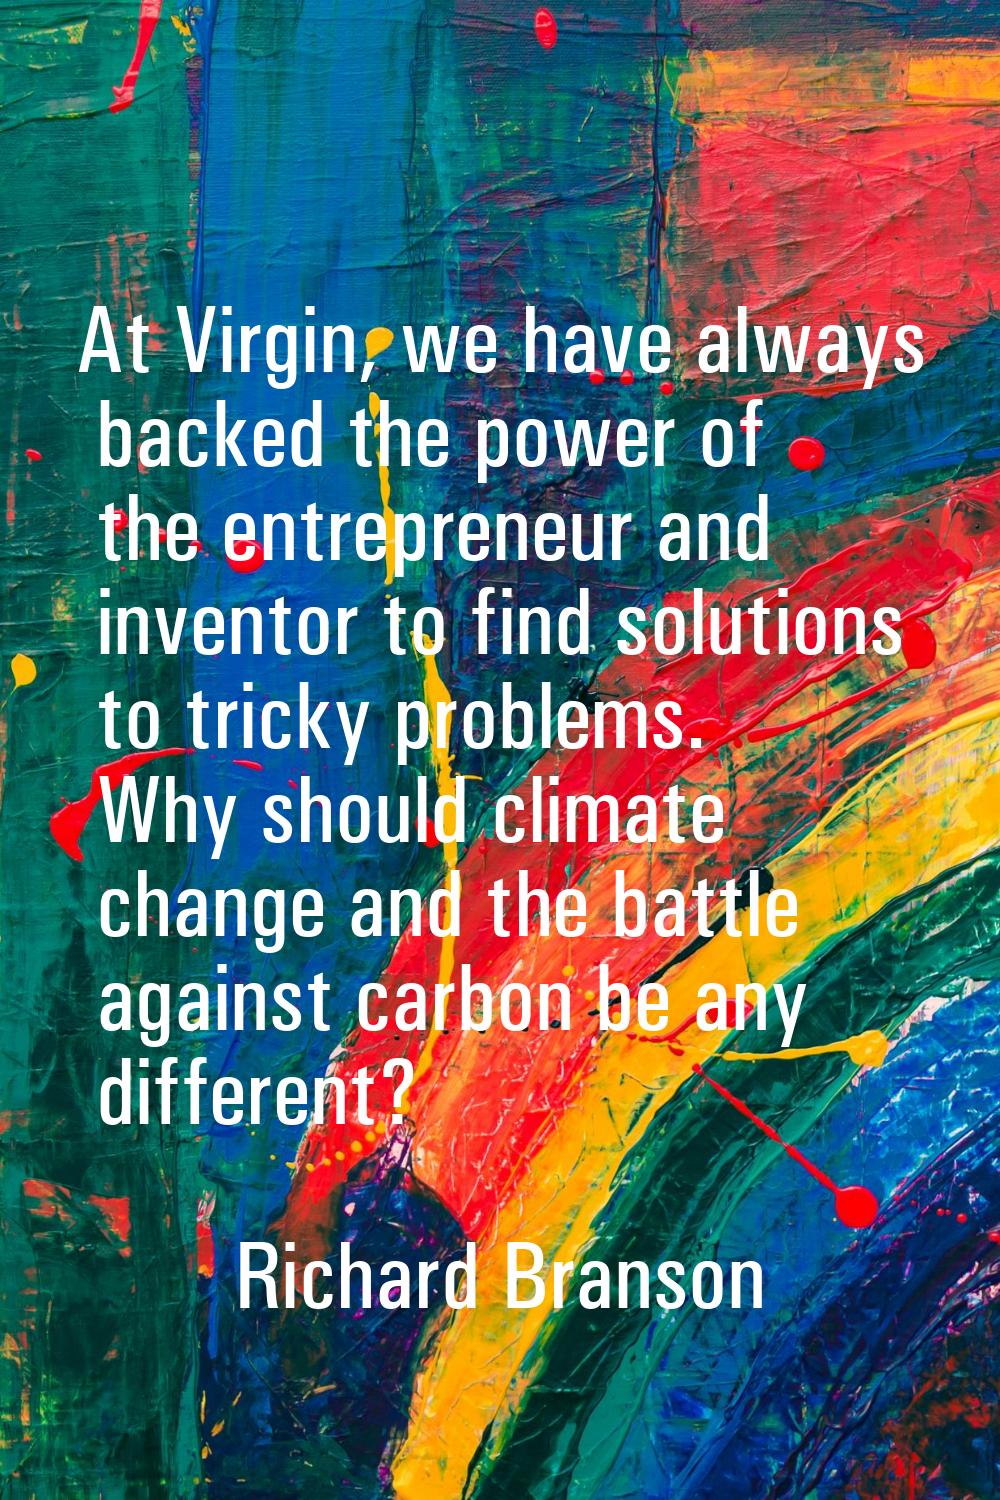 At Virgin, we have always backed the power of the entrepreneur and inventor to find solutions to tr